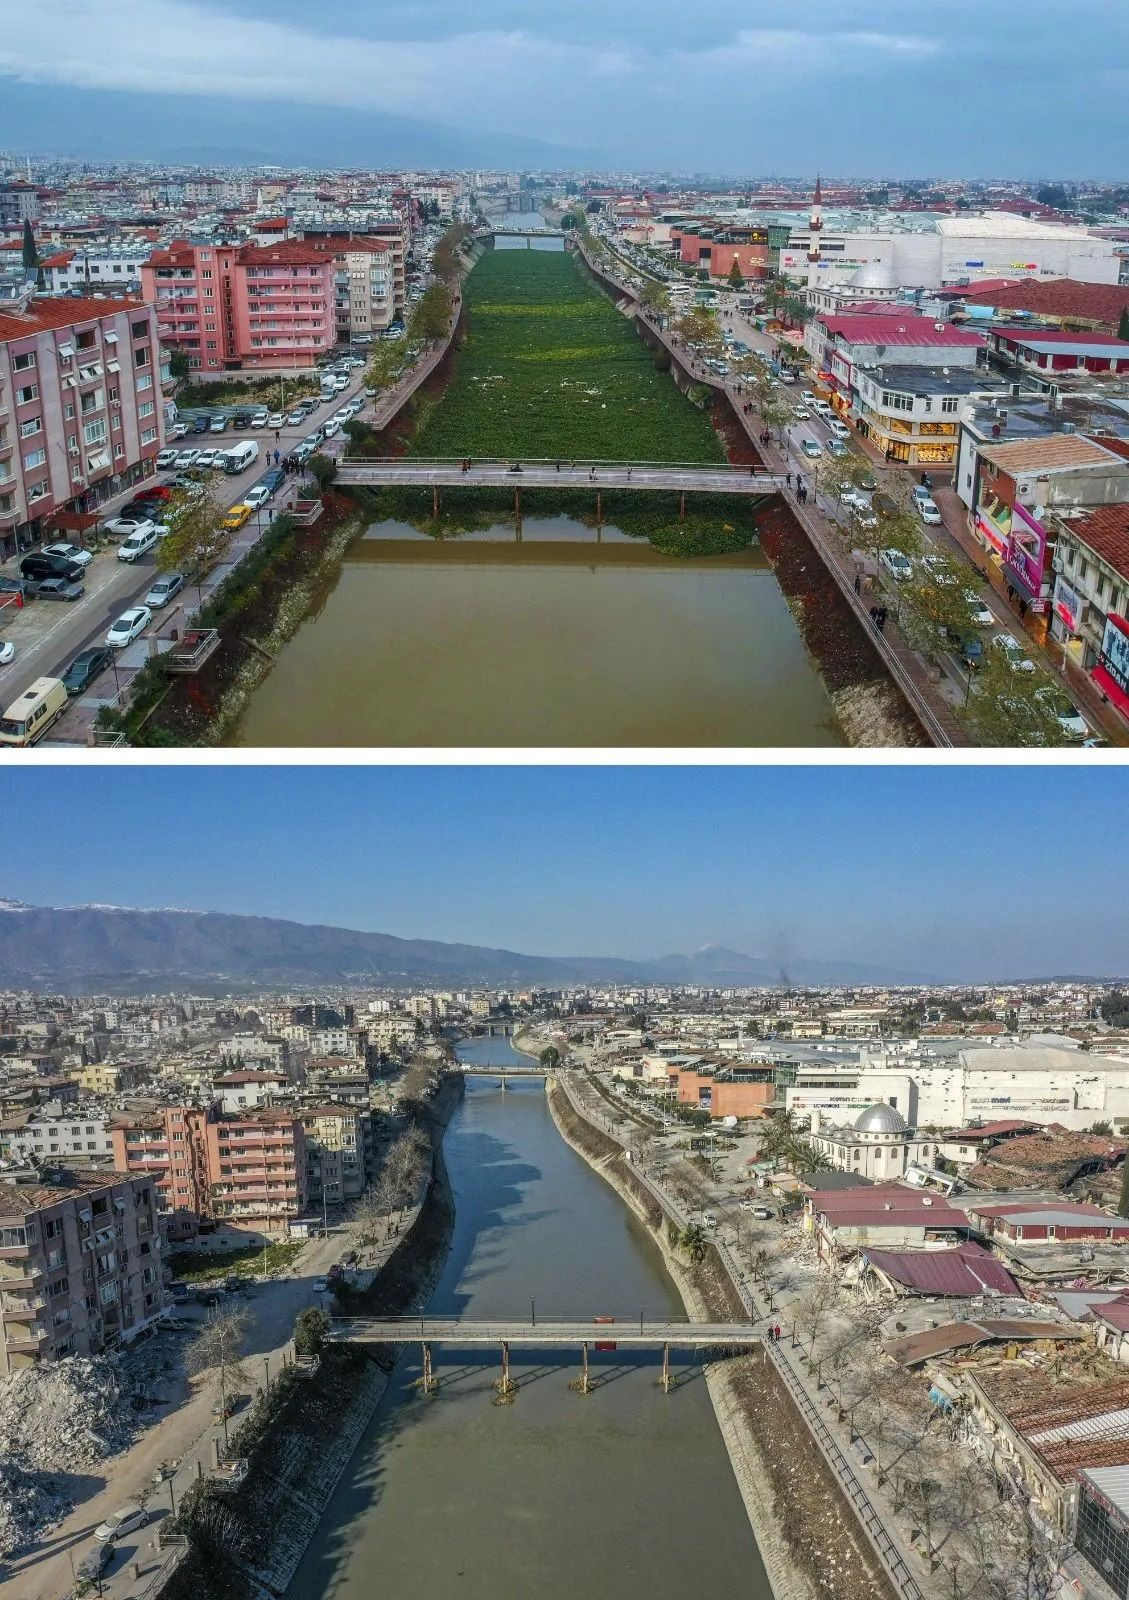 Before and after: Photos show destruction in two quake-stricken provinces - Page 5